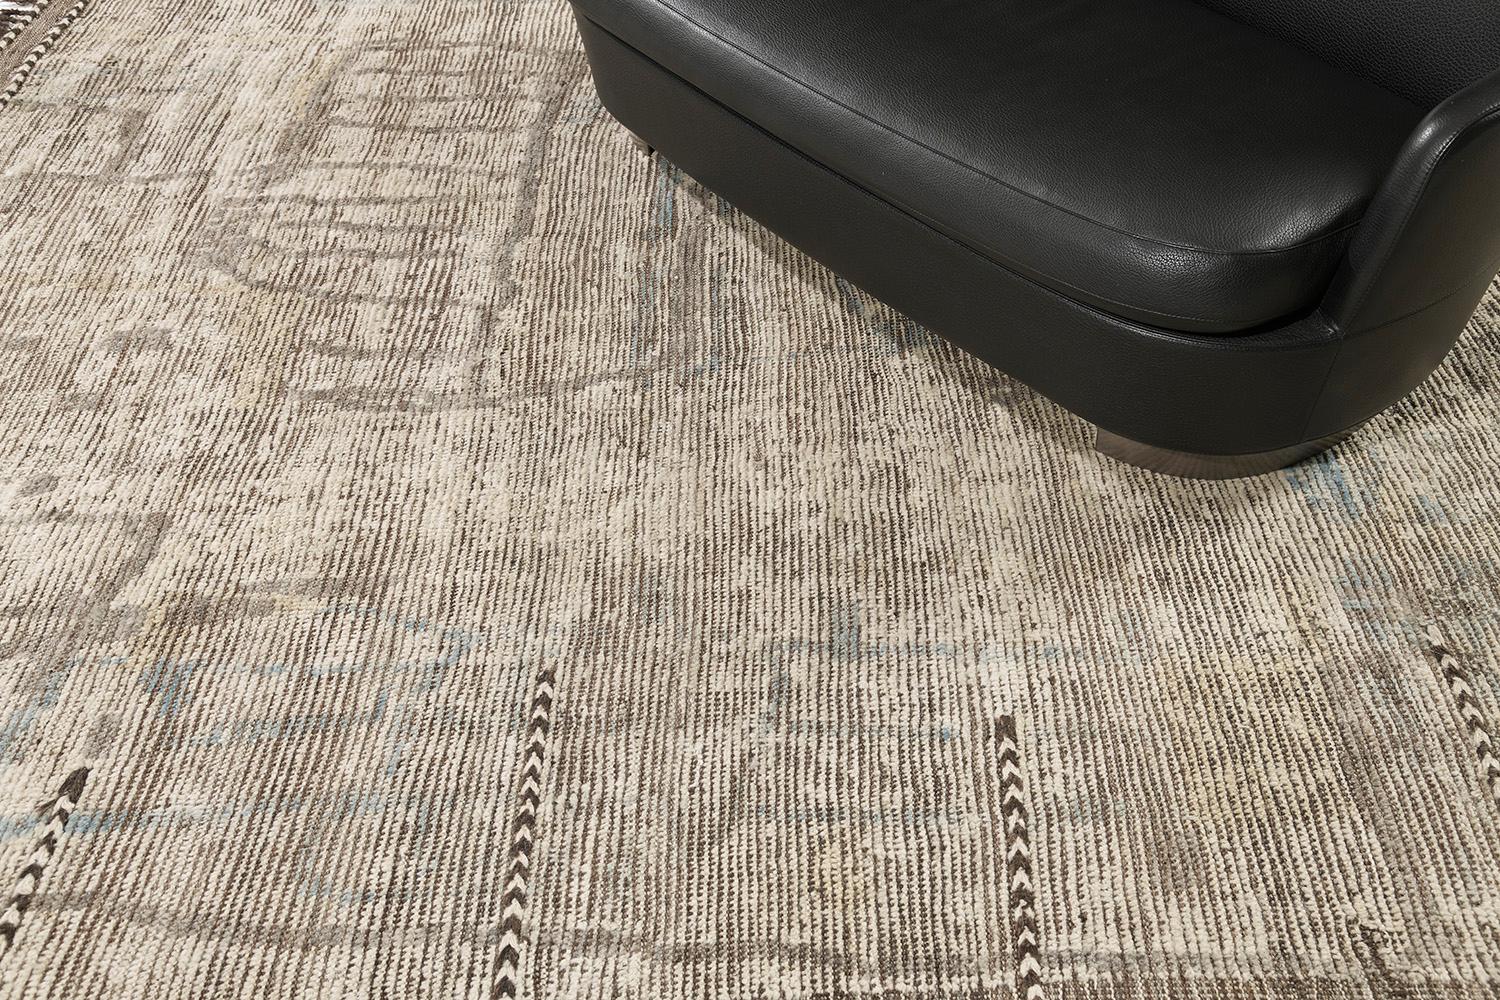 Meliska is a captivating textured rug with irregular motifs inspired by the Atlas Mountains of Morocco. Earthy tones of gold, blue, and surrounded by natural brown work cohesively to make for a great contemporary interpretation for the modern design